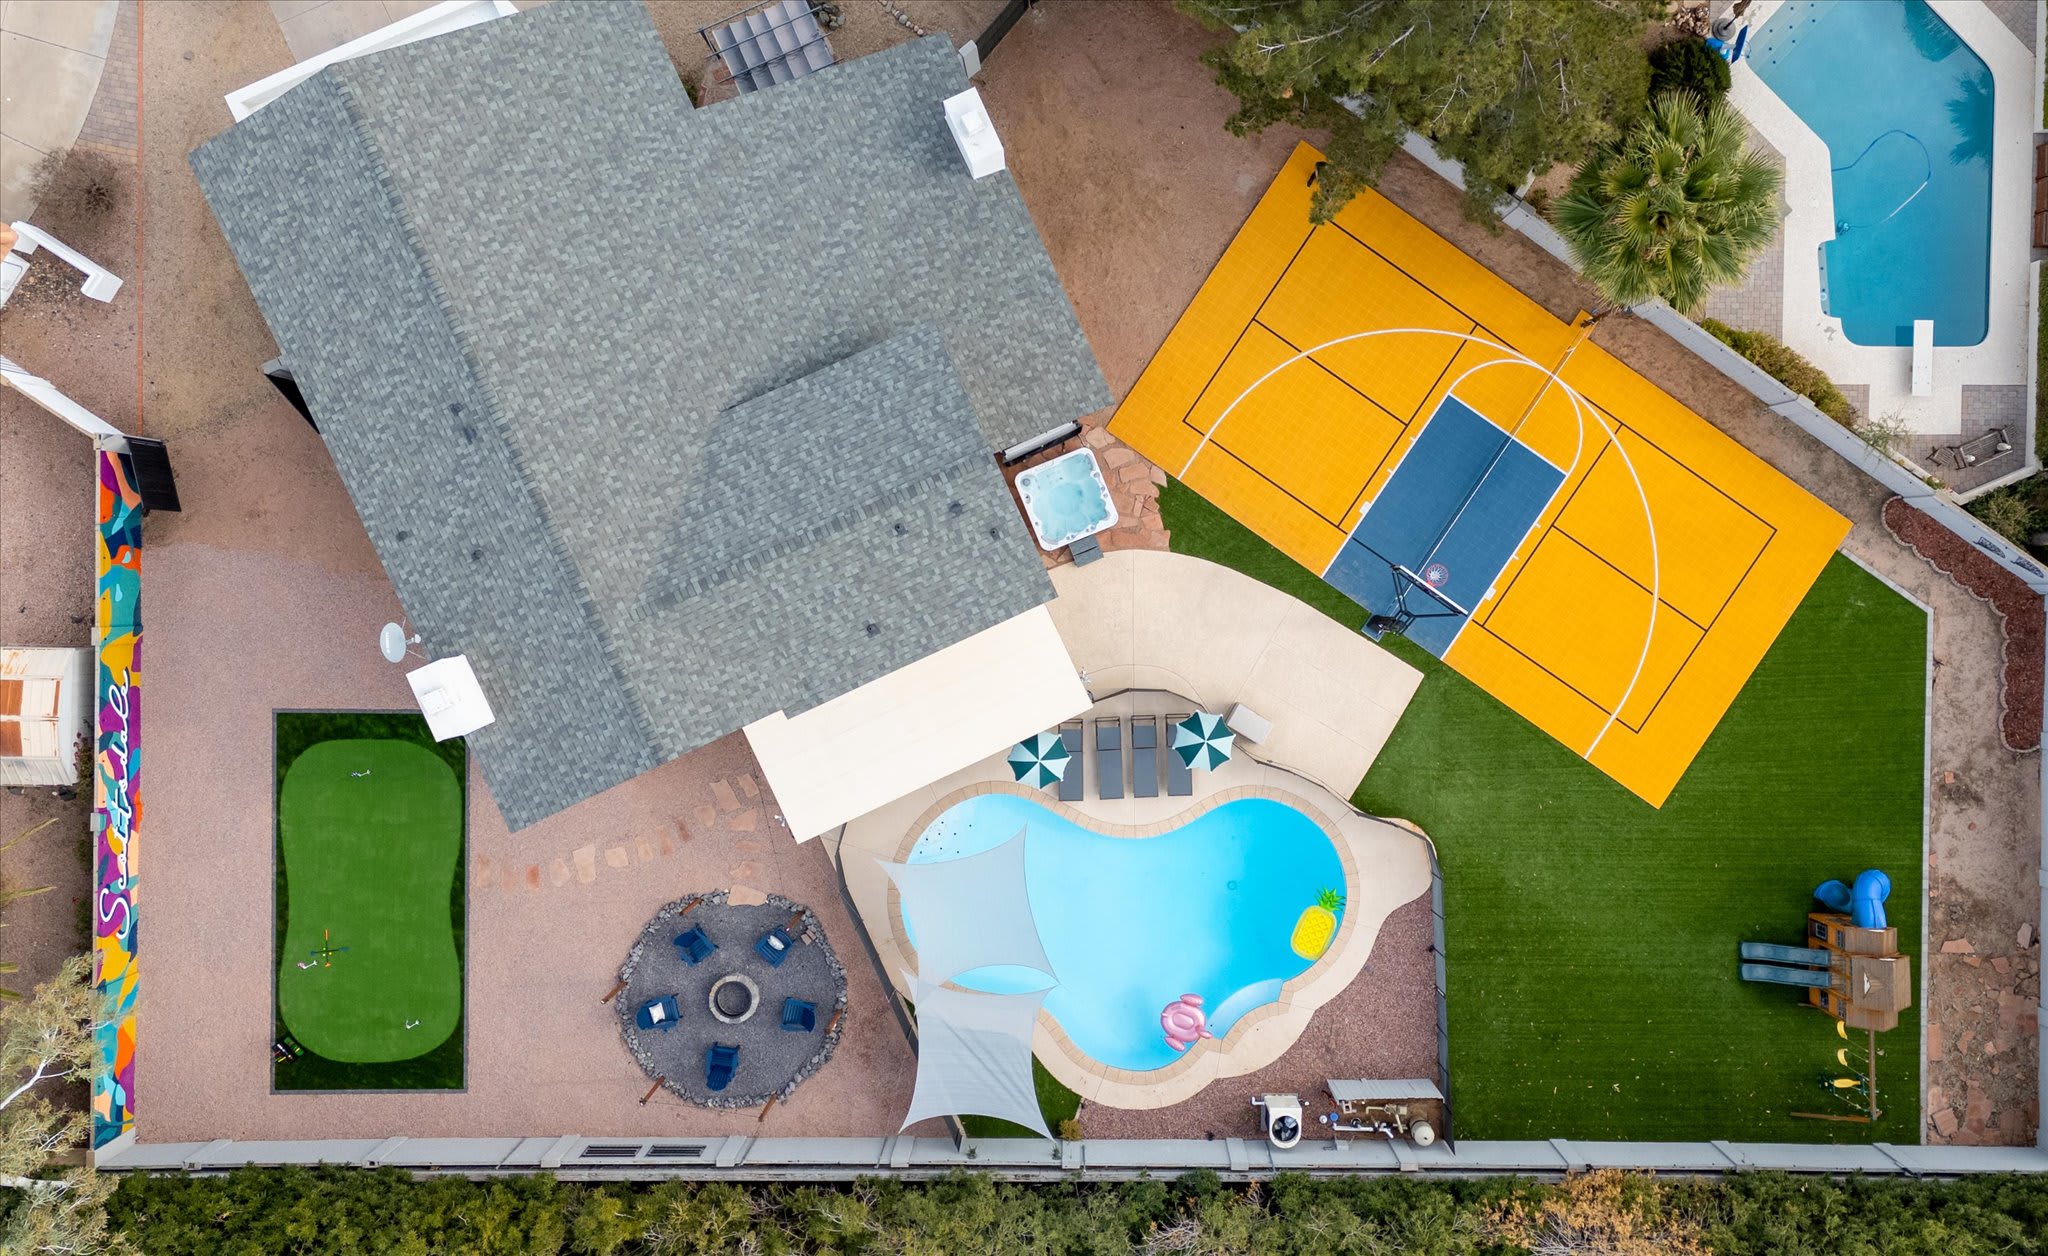 Massive outdoor oasis awaits your stay! Pickleball, basketball, firepit area, heated pool, putt putt, playground, or lounge chairs- Take your pick!